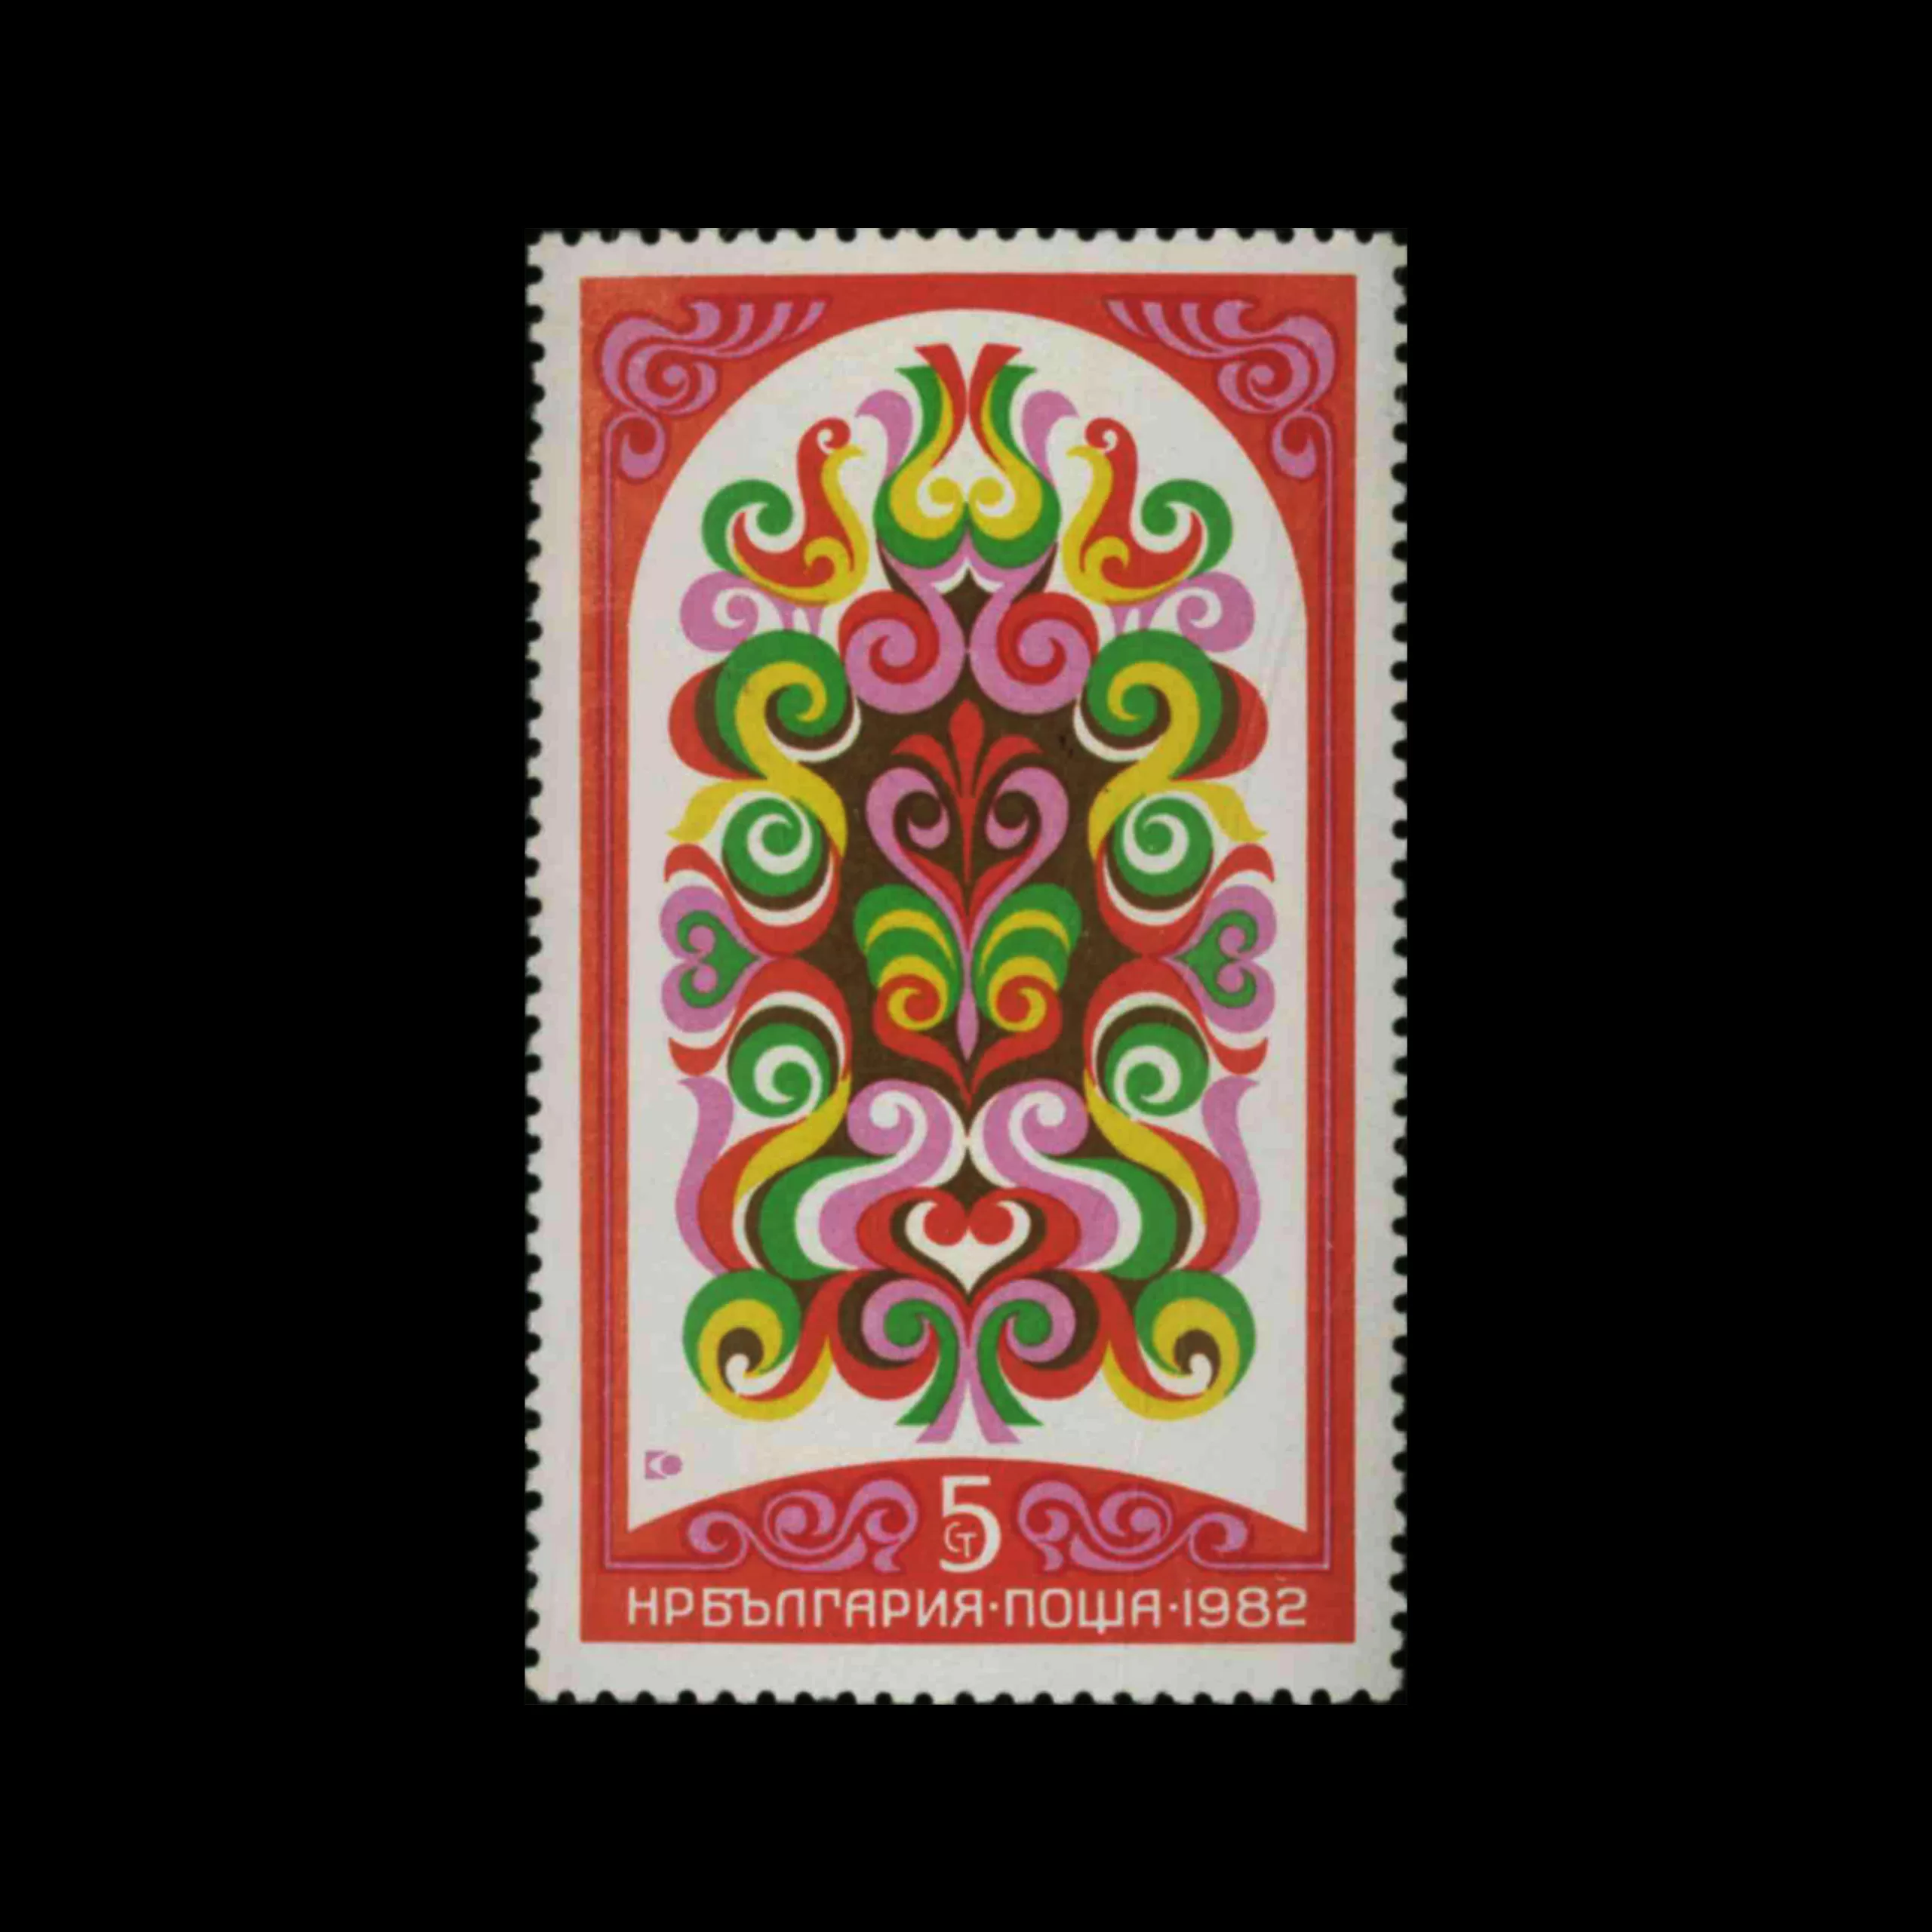 Folklore, Bulgarian Stamps, 1982. Designed by Stephan Kantscheff